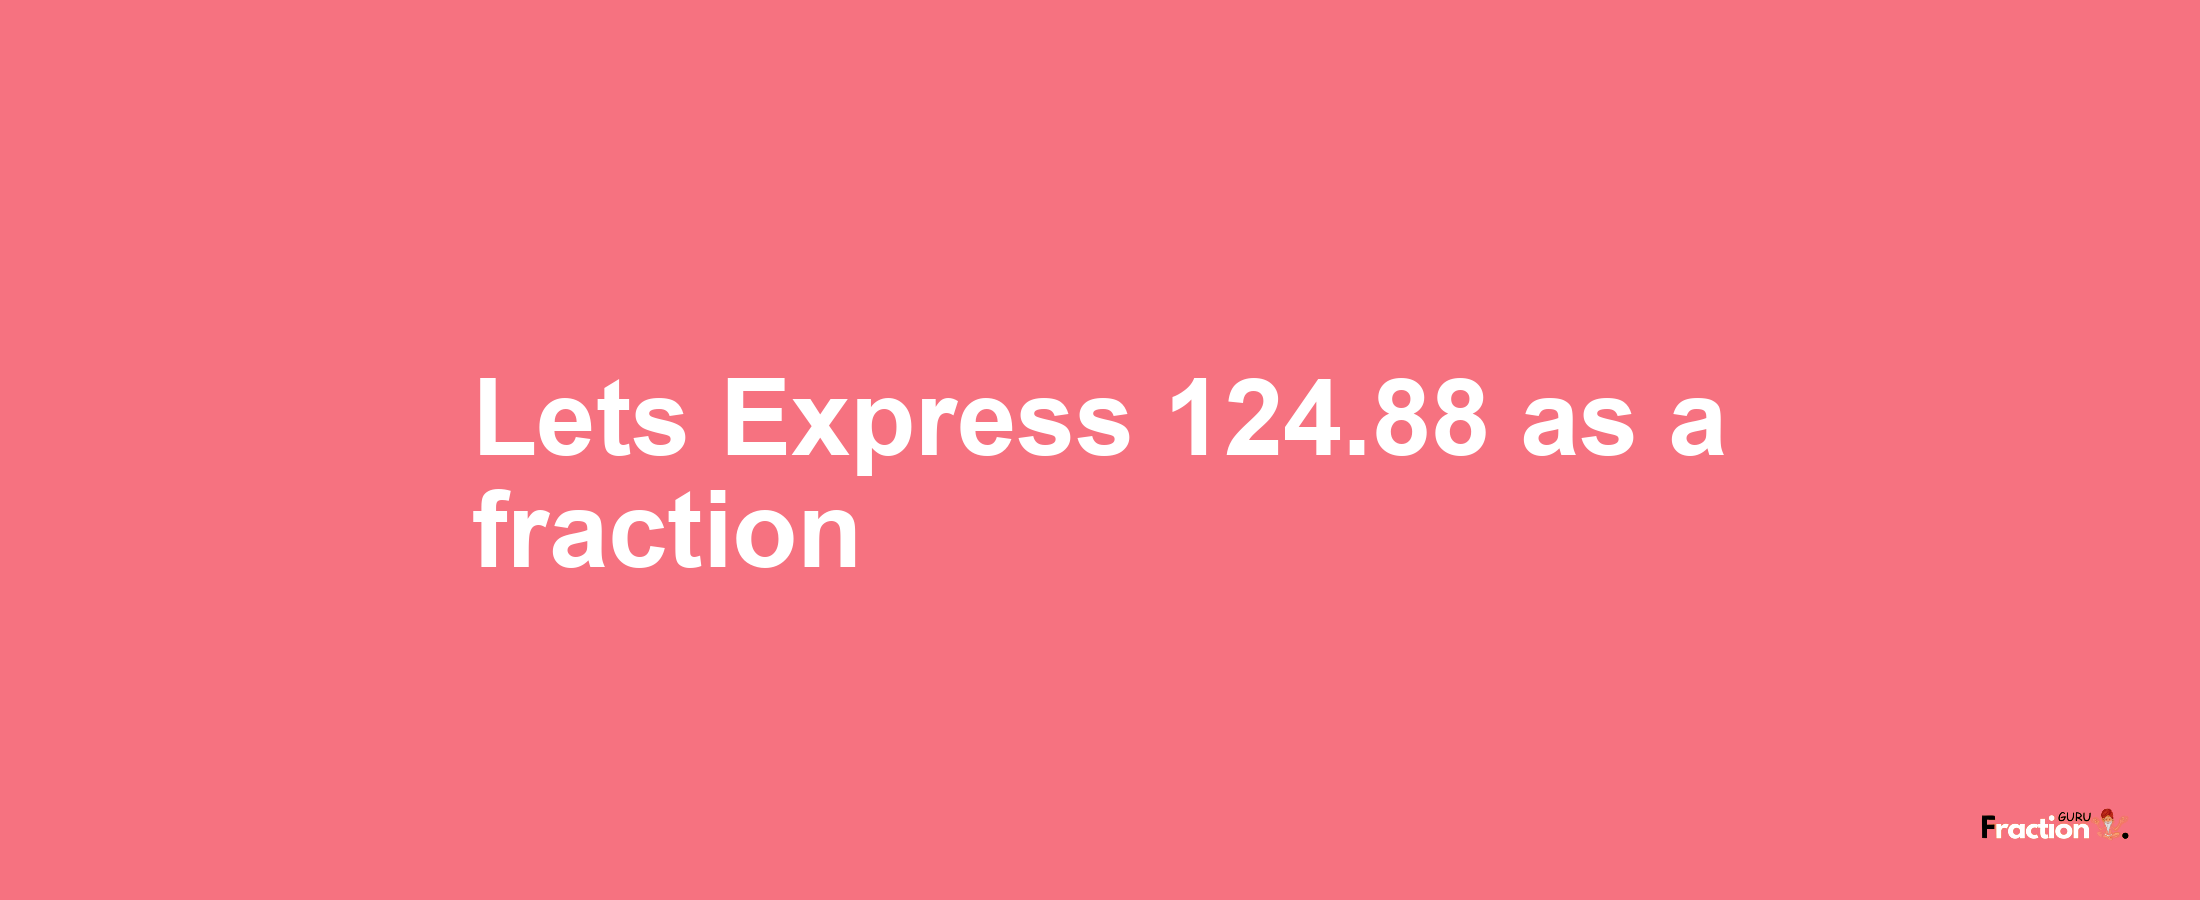 Lets Express 124.88 as afraction